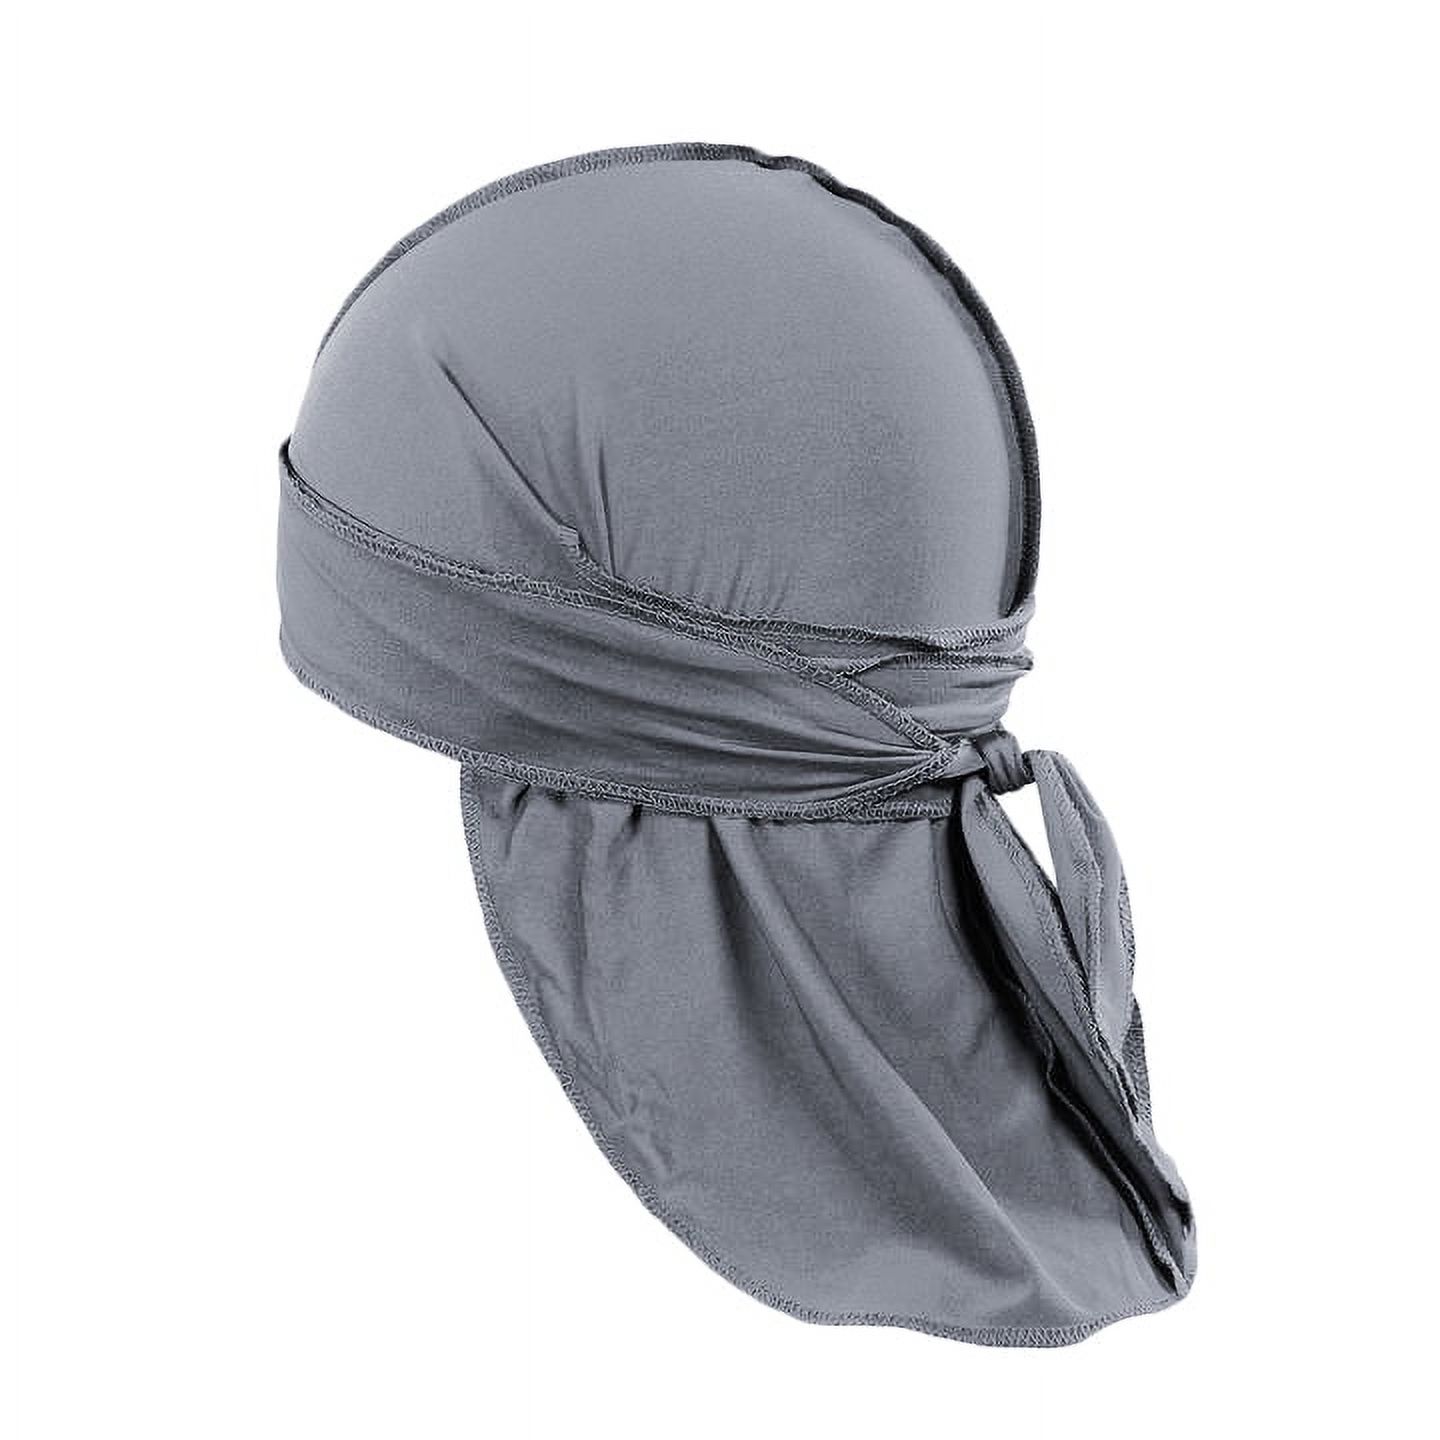 Pack of 3 Durags Headwrap for Men Waves Headscarf Bandana Doo Rag Tail (Grey) - image 1 of 4